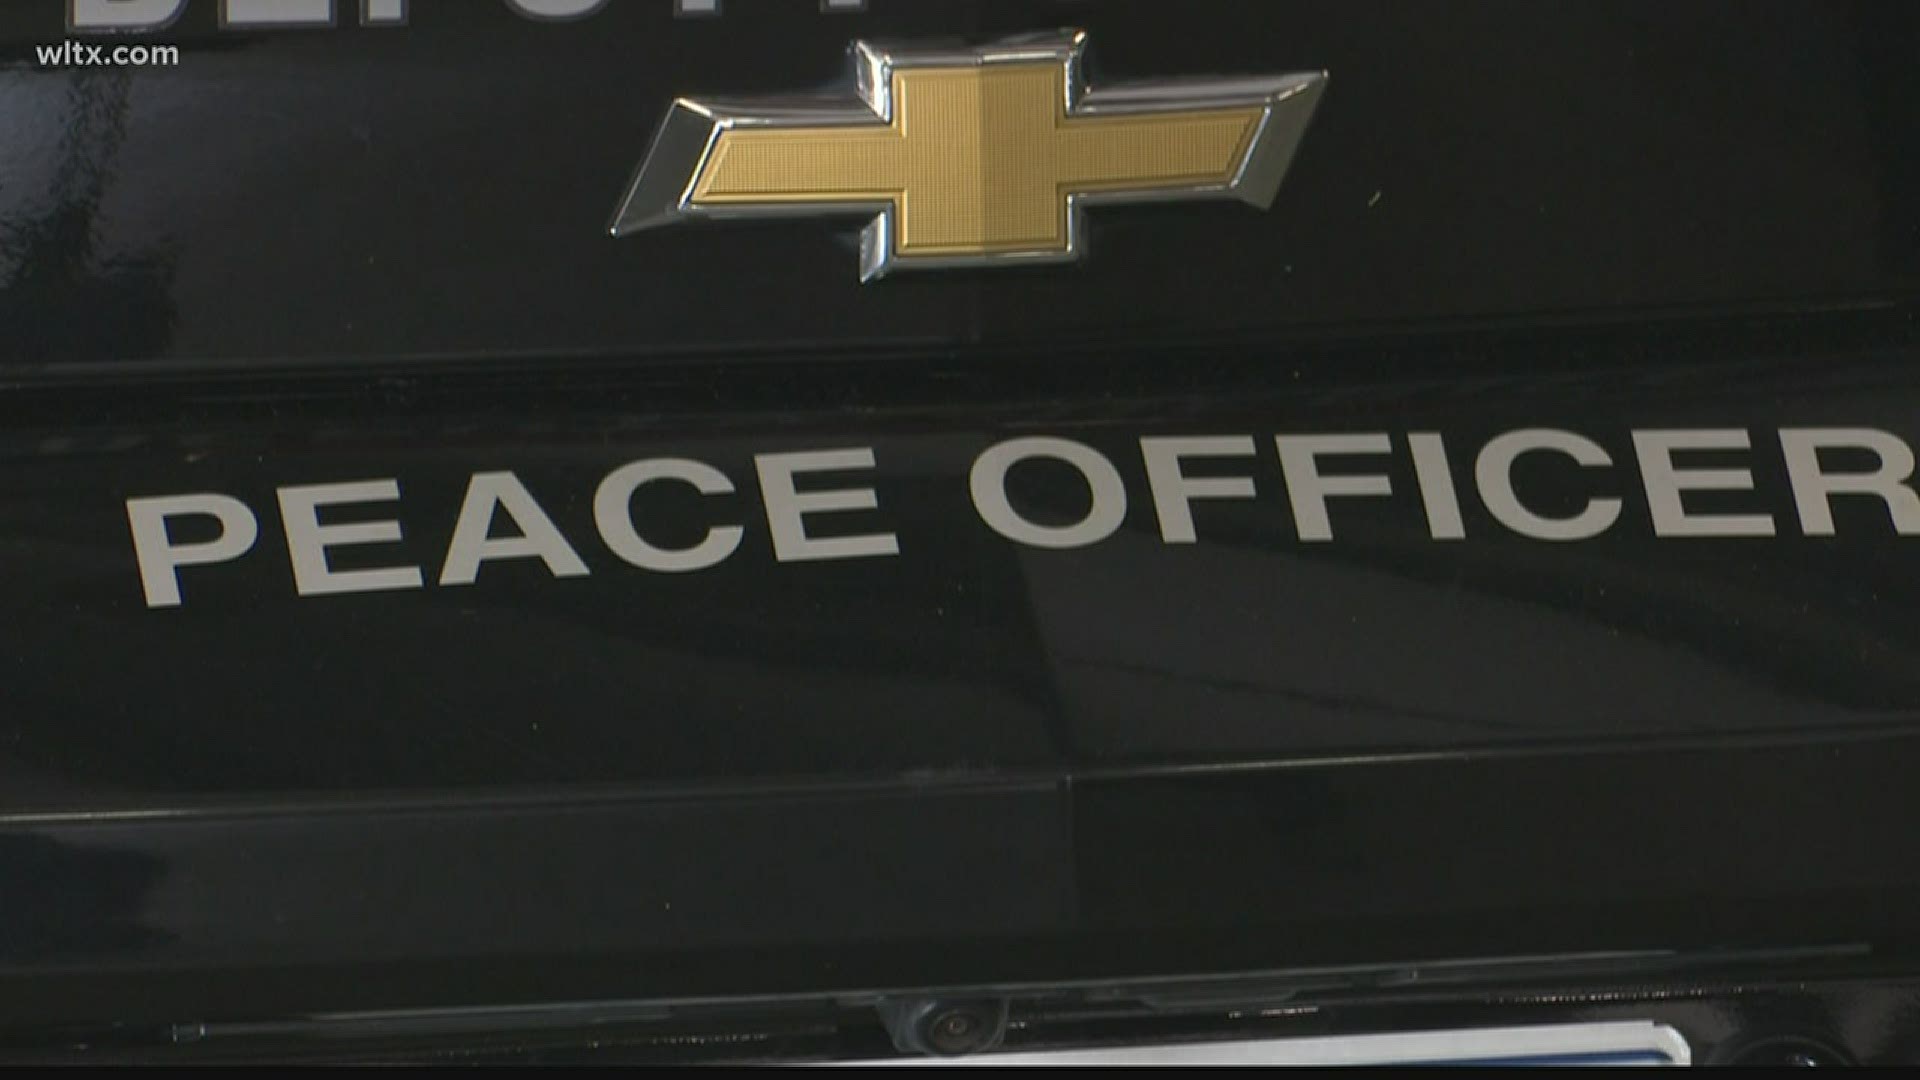 The department vehicles also have stickers that read 'Peace Officer.'